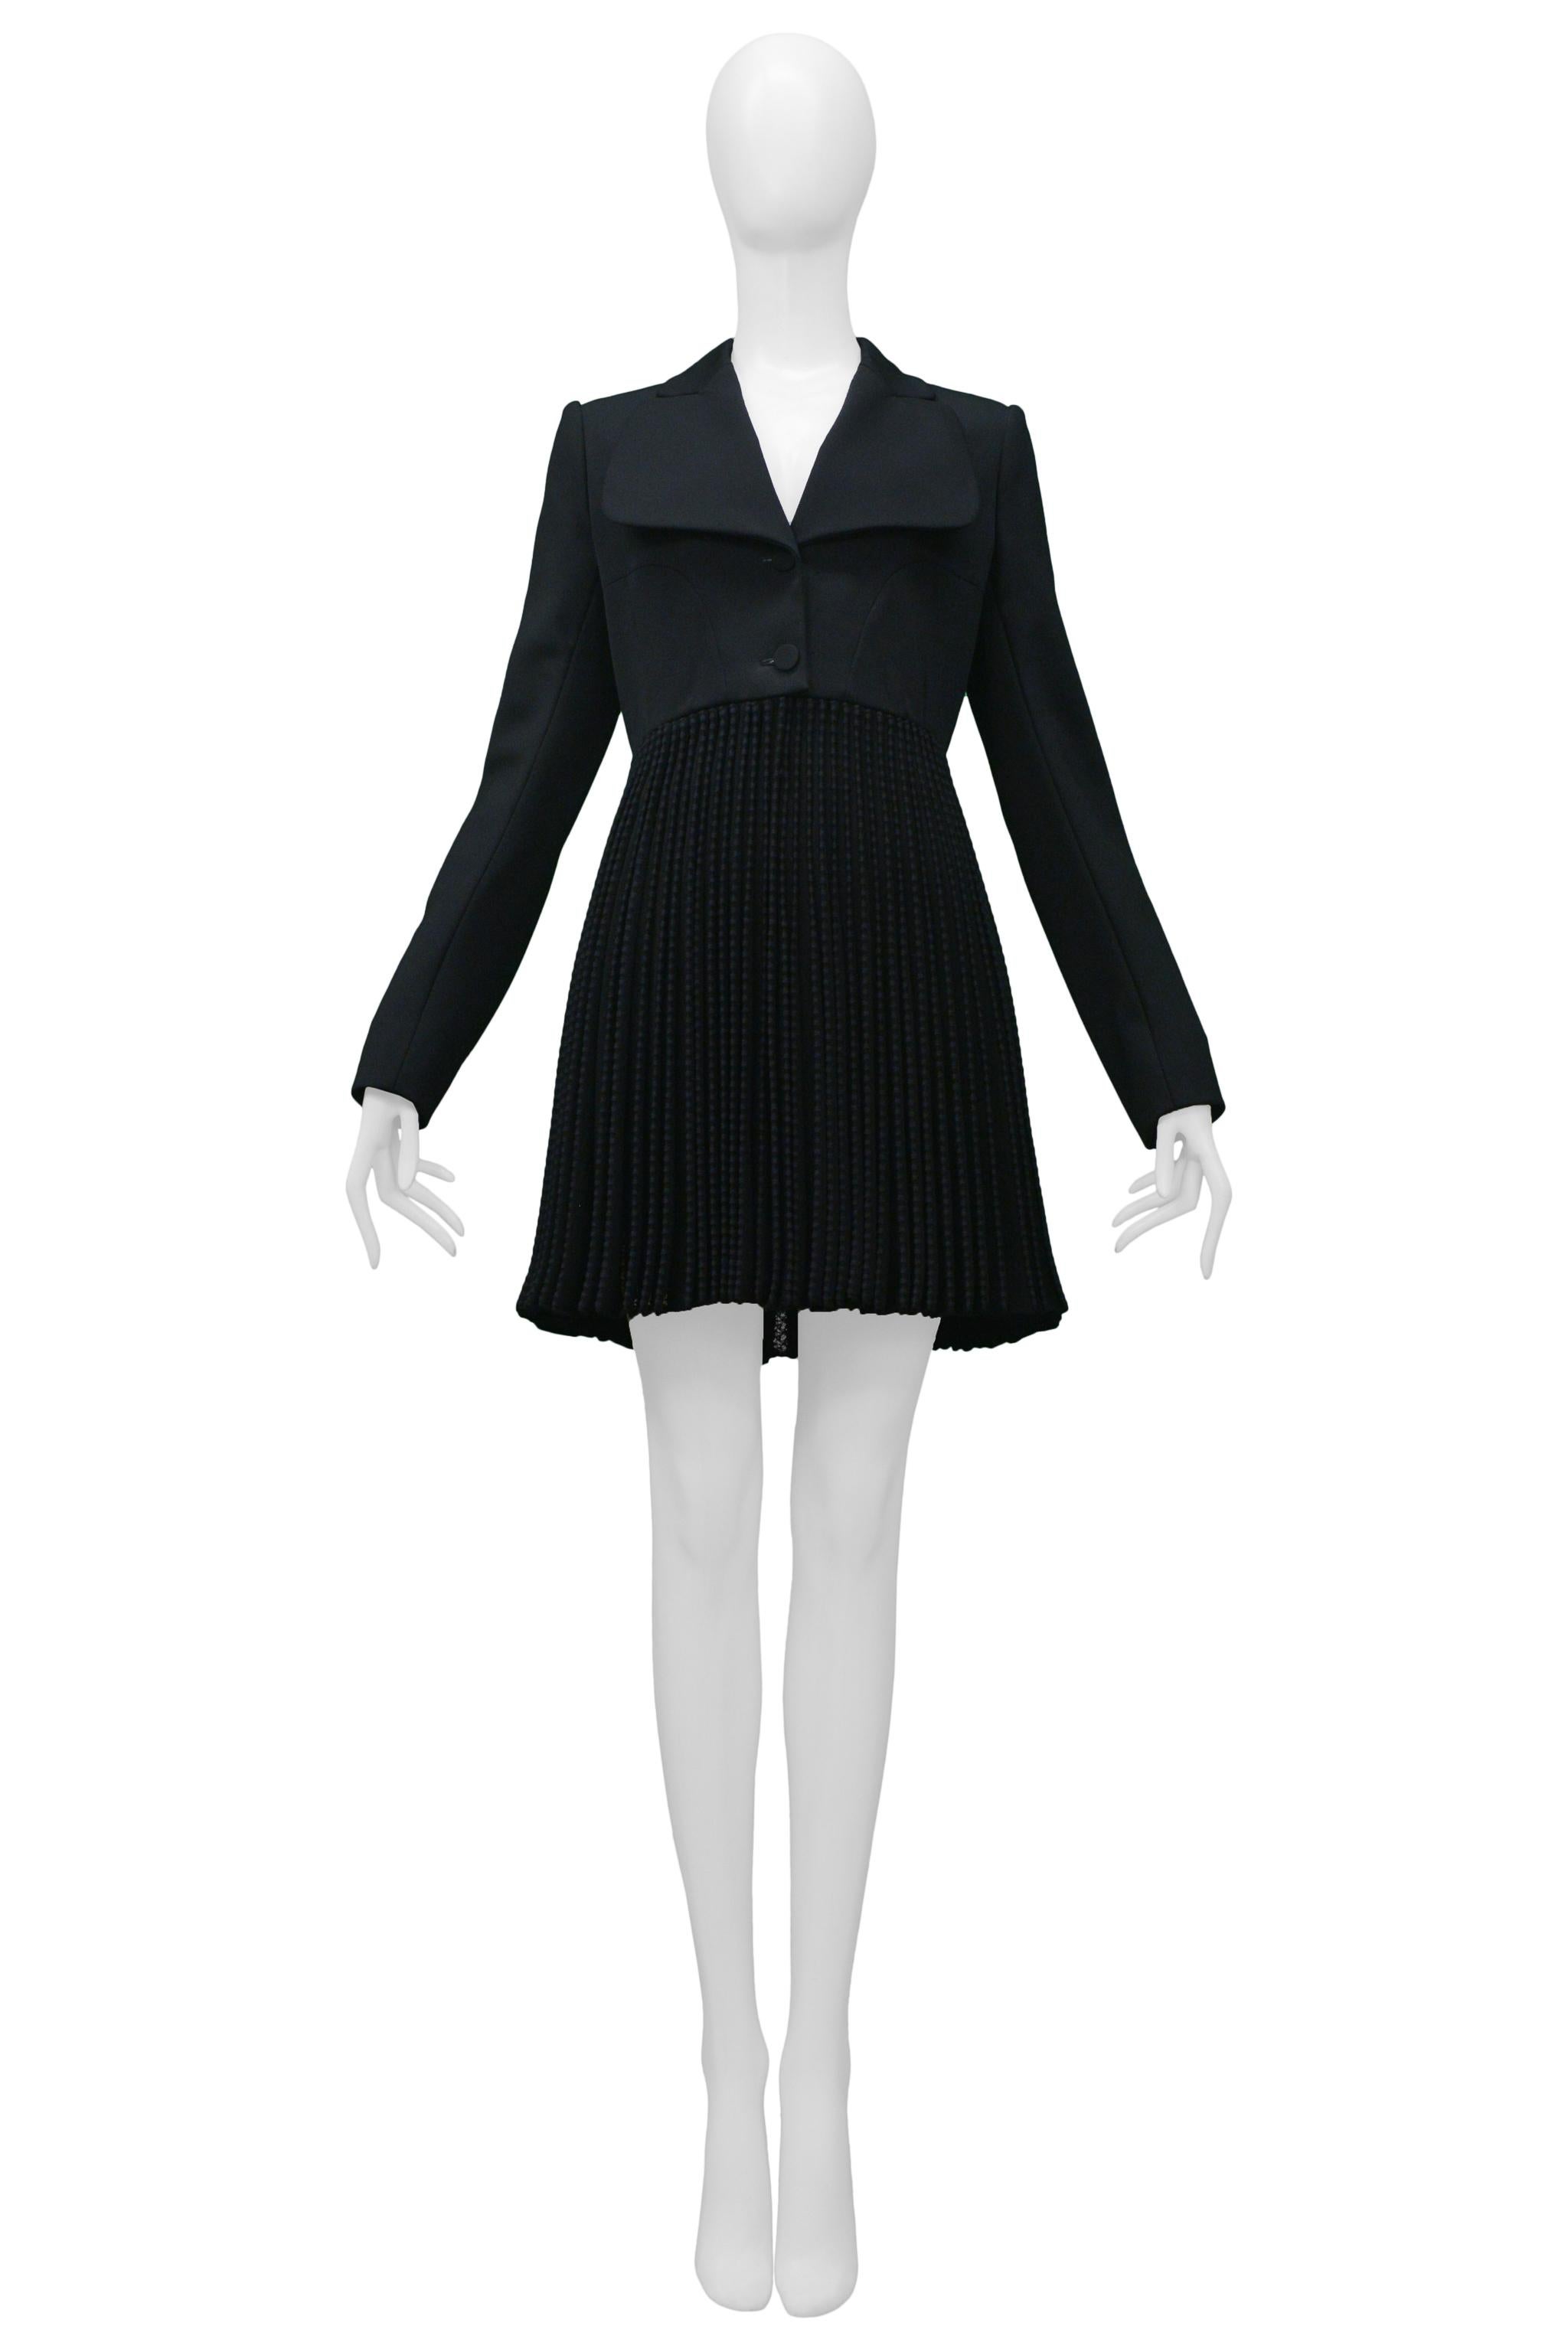 Resurrection Vintage is excited to offer a vintage Azzedine Alaia black coat featuring a pleated skirt with lace, a wide rounded notched collar, and armhole princess seams. 

Alaia Label 
Size: 42
Wool, Polyester, and Cotton
Excellent Vintage